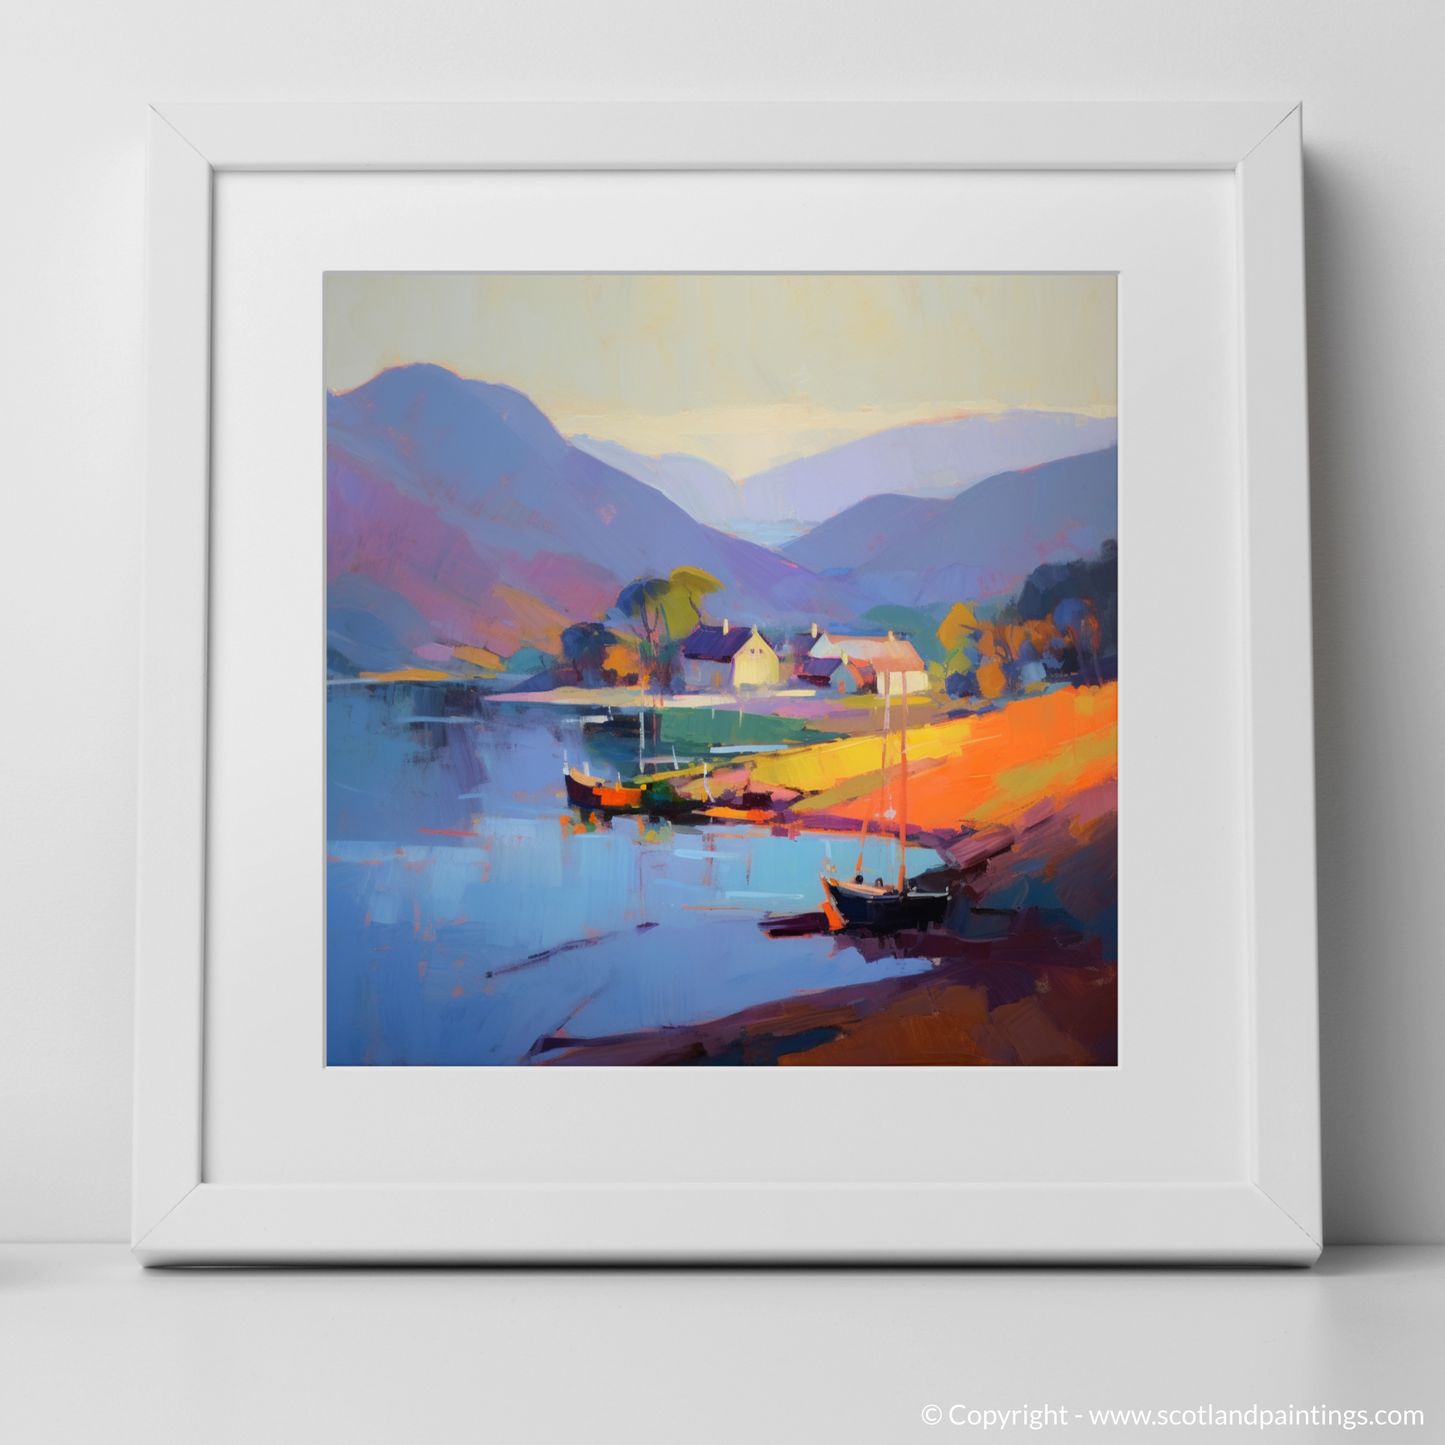 Golden Hour at Mallaig Harbour: An Expressionist Ode to Scotland's Coastal Beauty